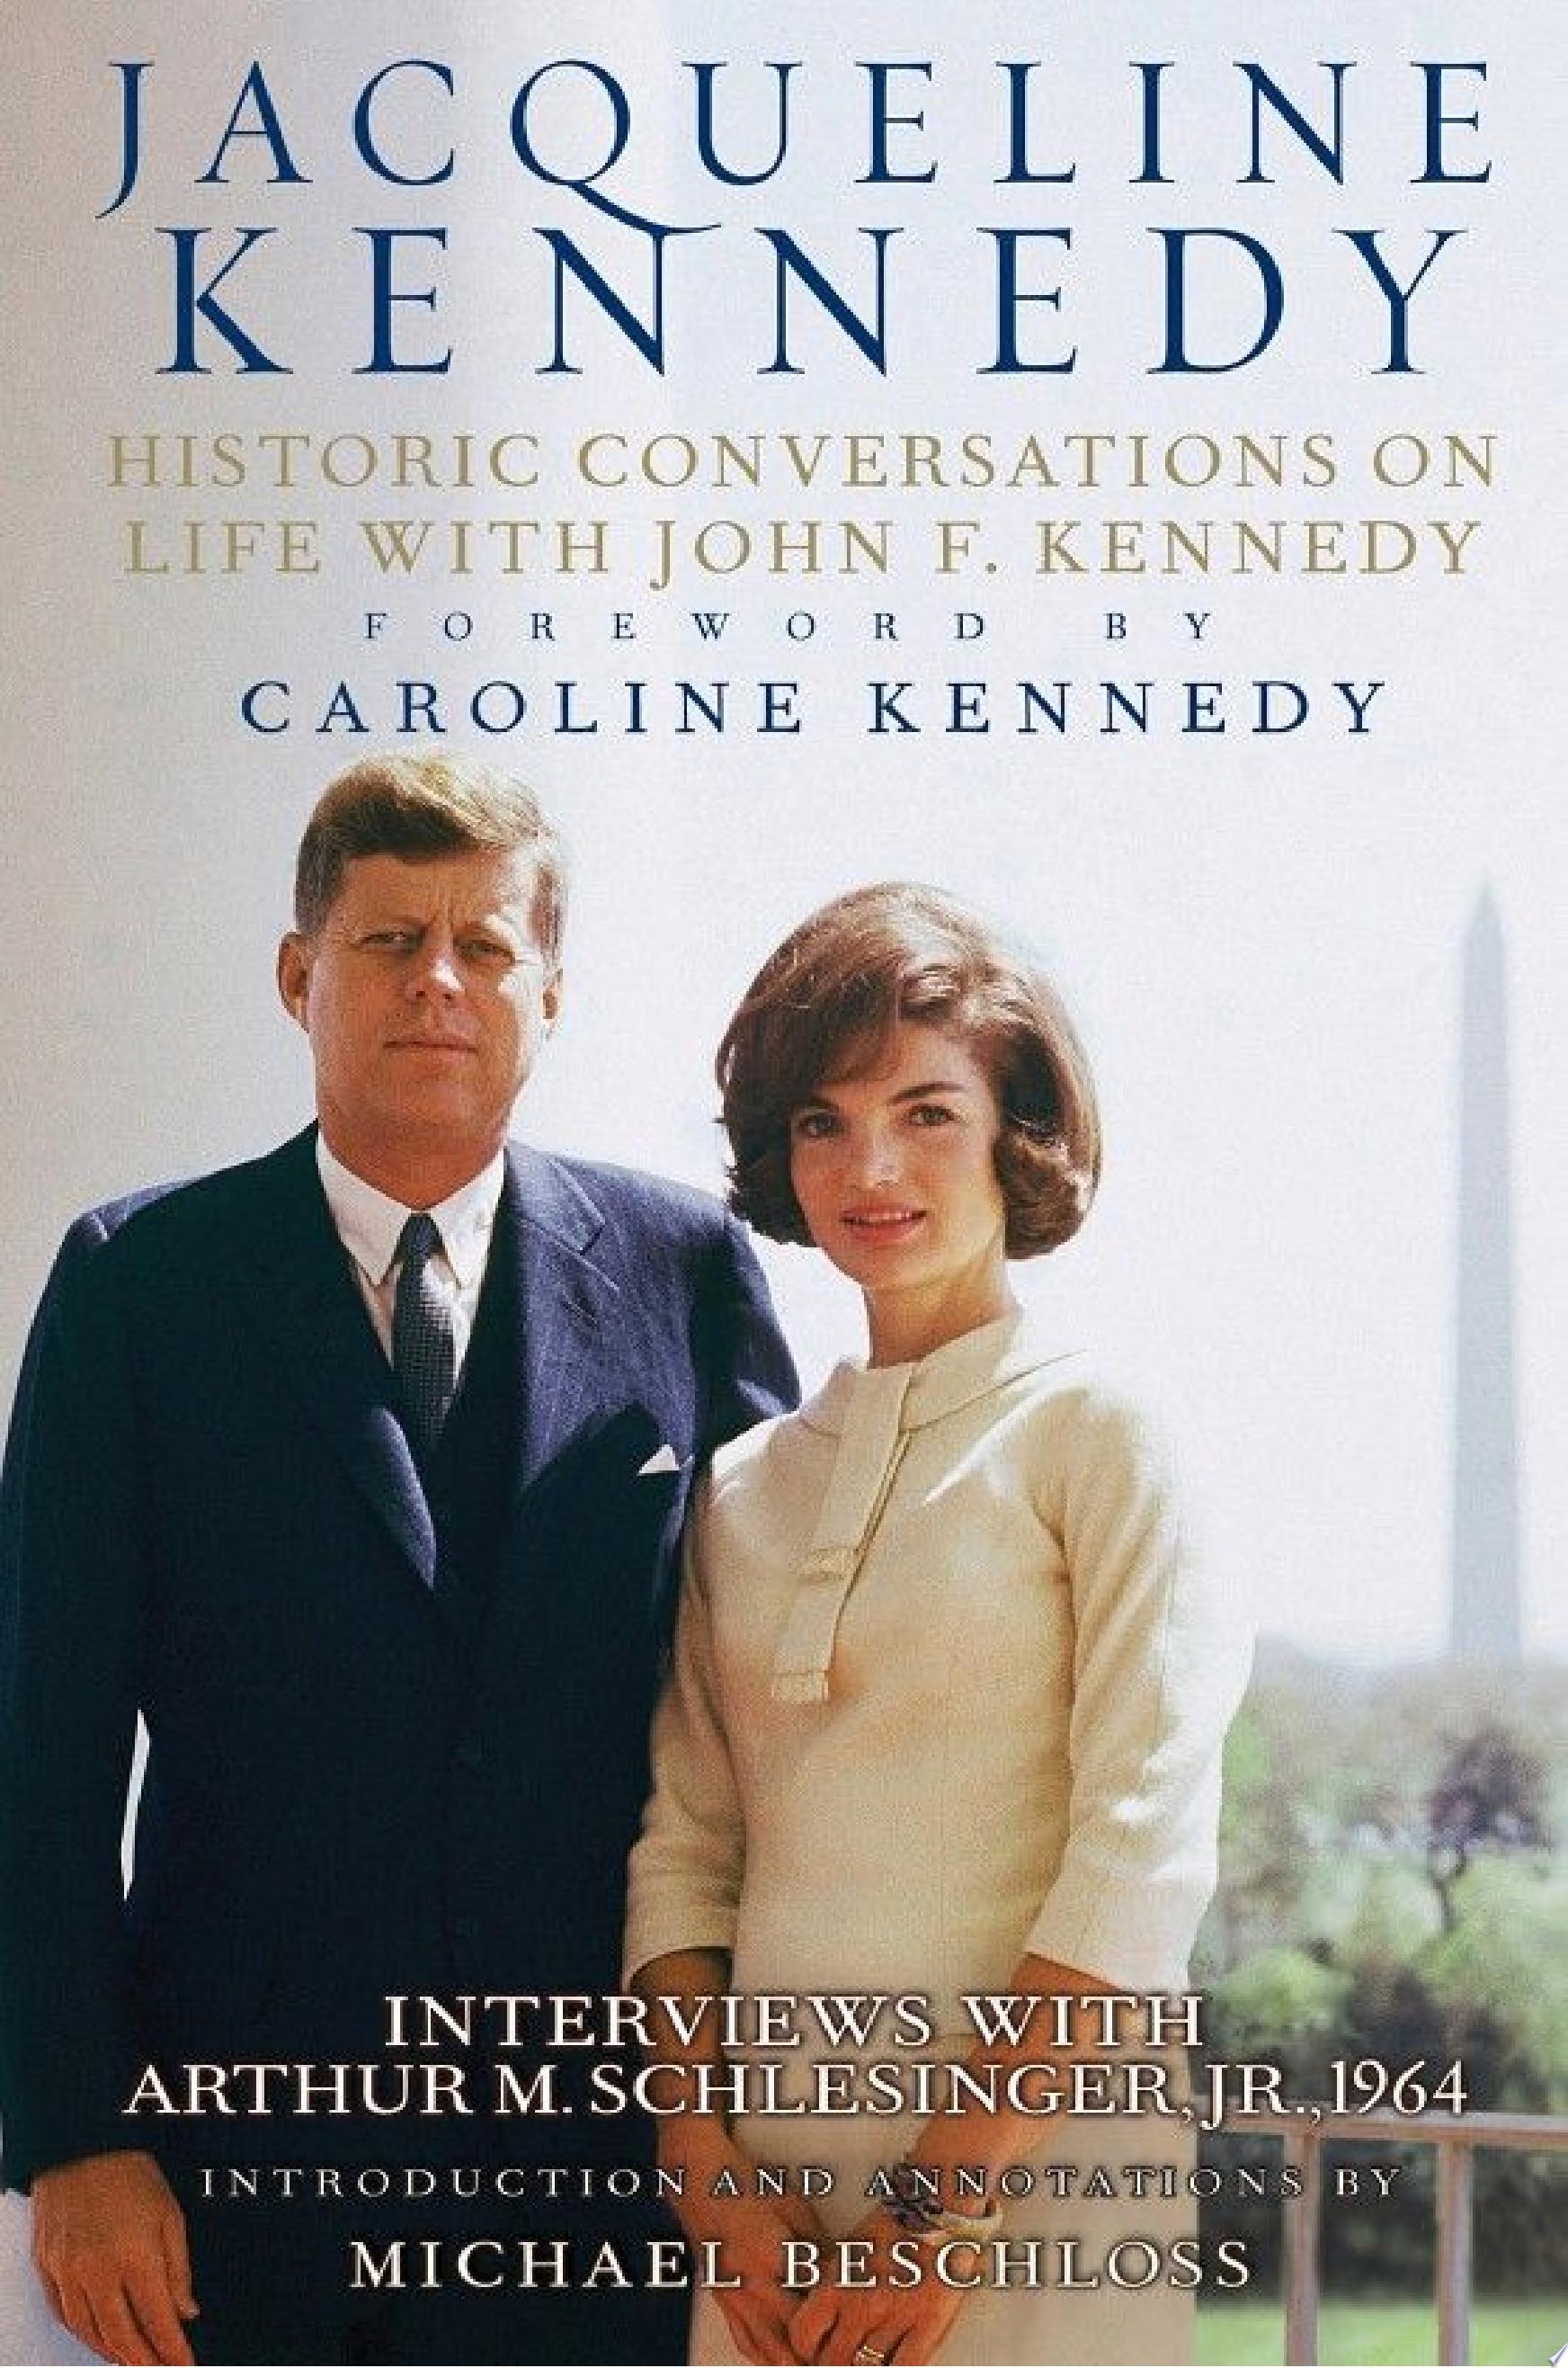 Image for "Jacqueline Kennedy"